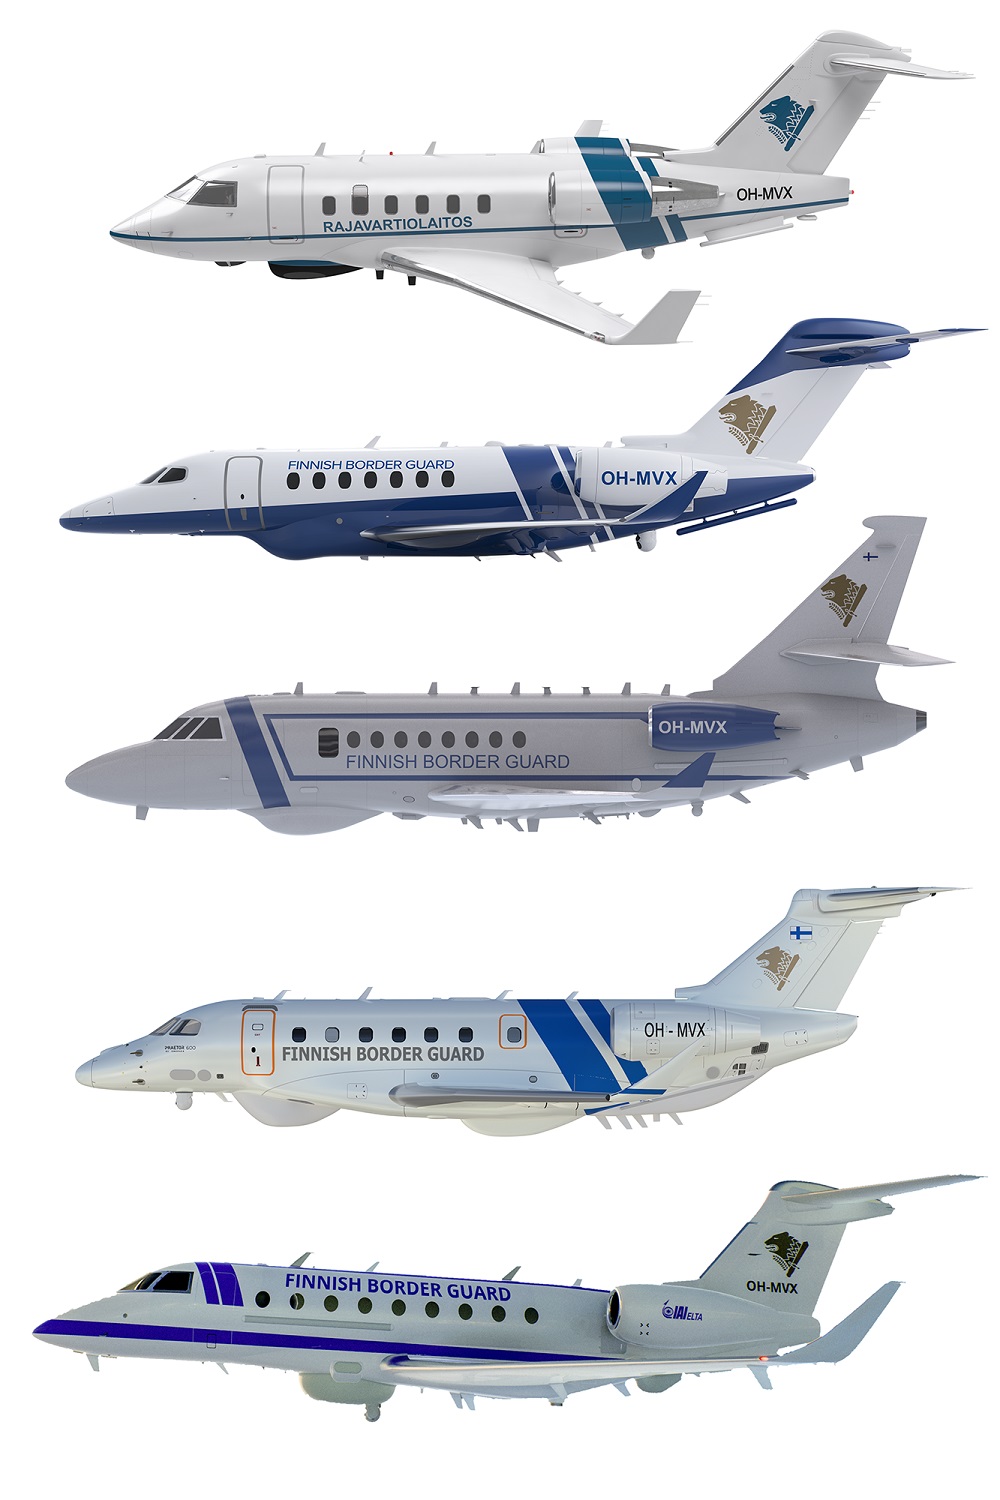 Five different jet aircraft types, one below another, illustration.